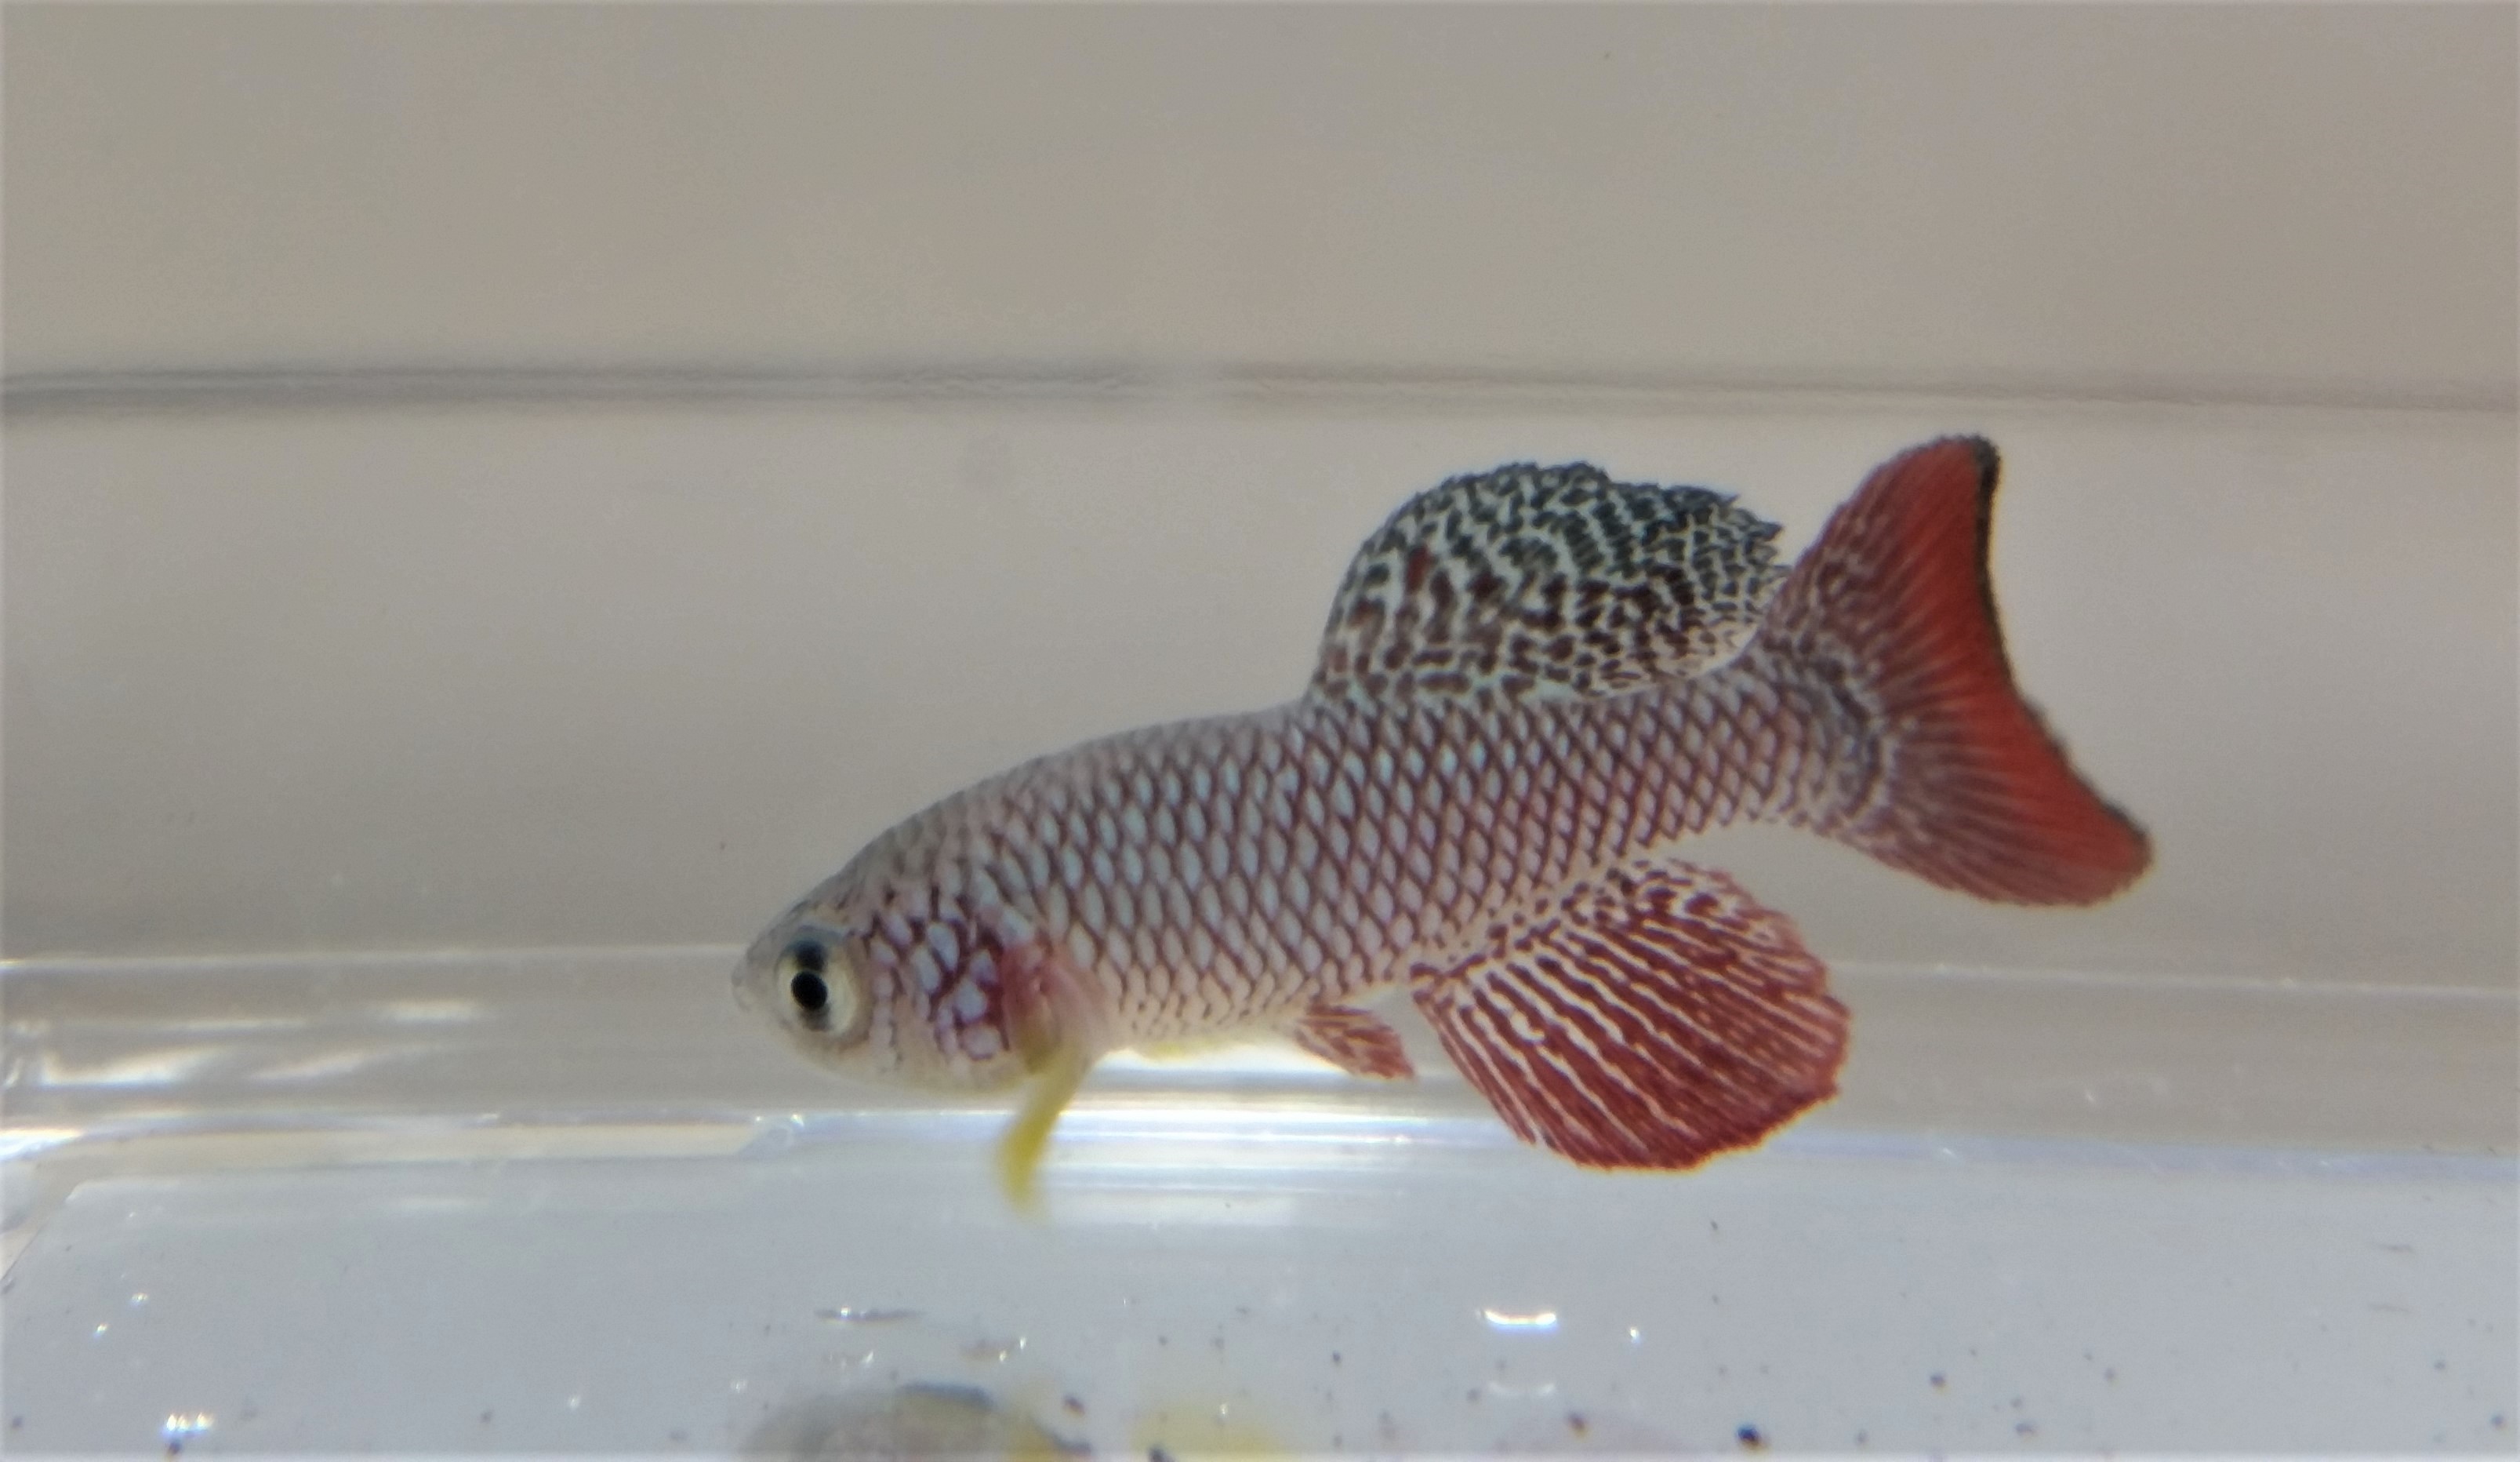 Male turquoise killifish with bright red and yellow colouration